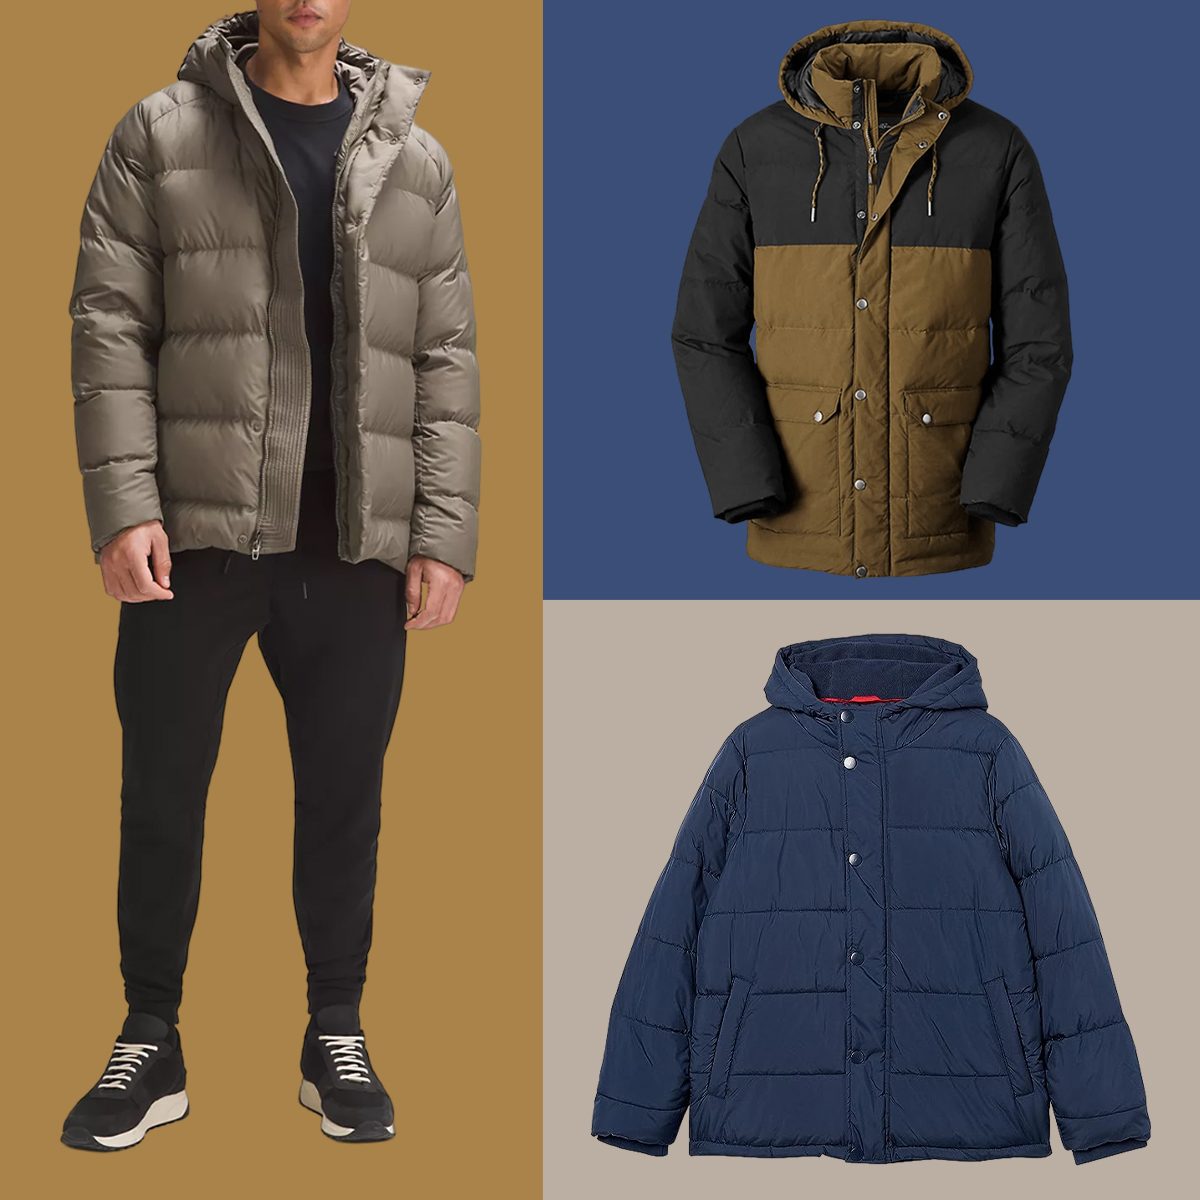 Winter Warmth: The Best Men's Jackets for Winter